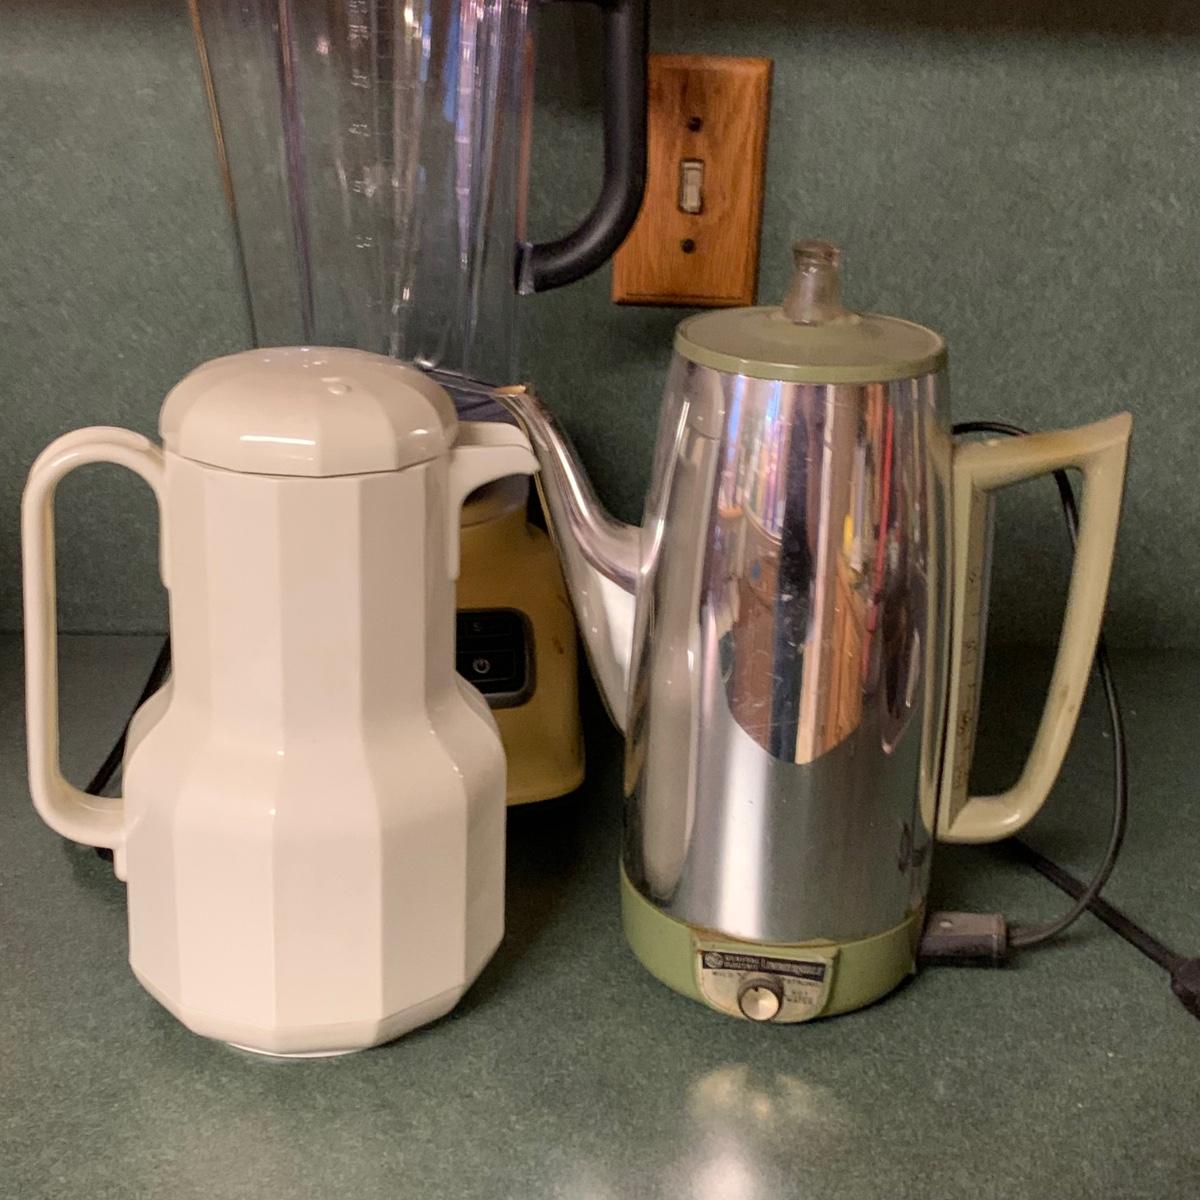 LOT 215R: Kitchen Collection: KitchenAid Blender, Corning Thermique Carafe,  GE Coffee Electric Coffee Pot, Vintage Tulip Glasses & More |  EstateSales.org